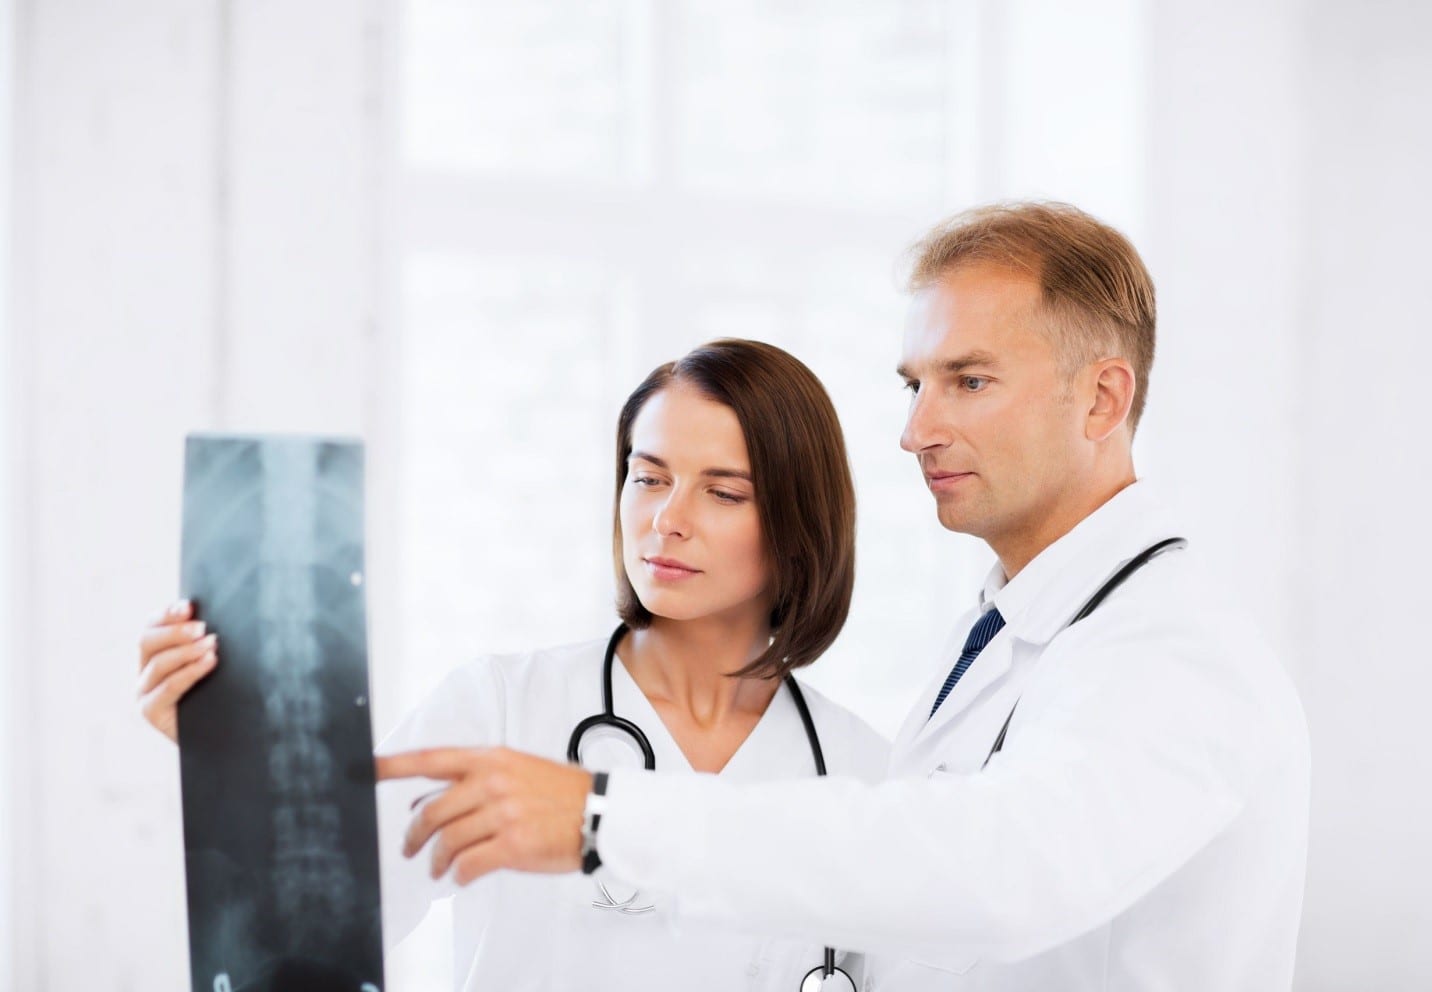 Why Do I Need An Attorney With Experience In Spinal Cord Injury Cases?